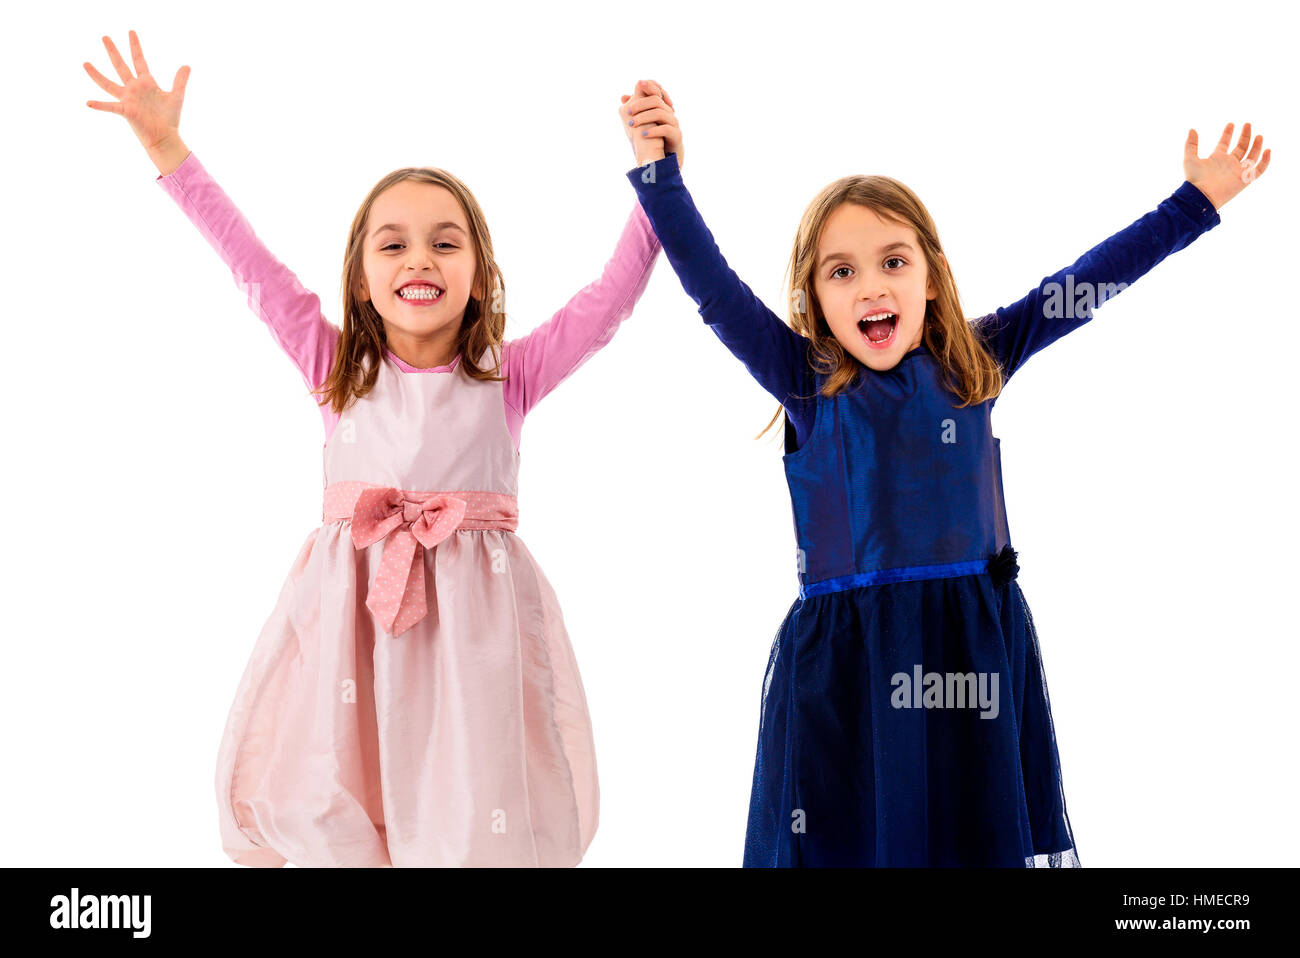 Twin girls are celebrating with hands risen holding hands. Children victorious and excited with their achievement and accomplishment. Reaching their g Stock Photo